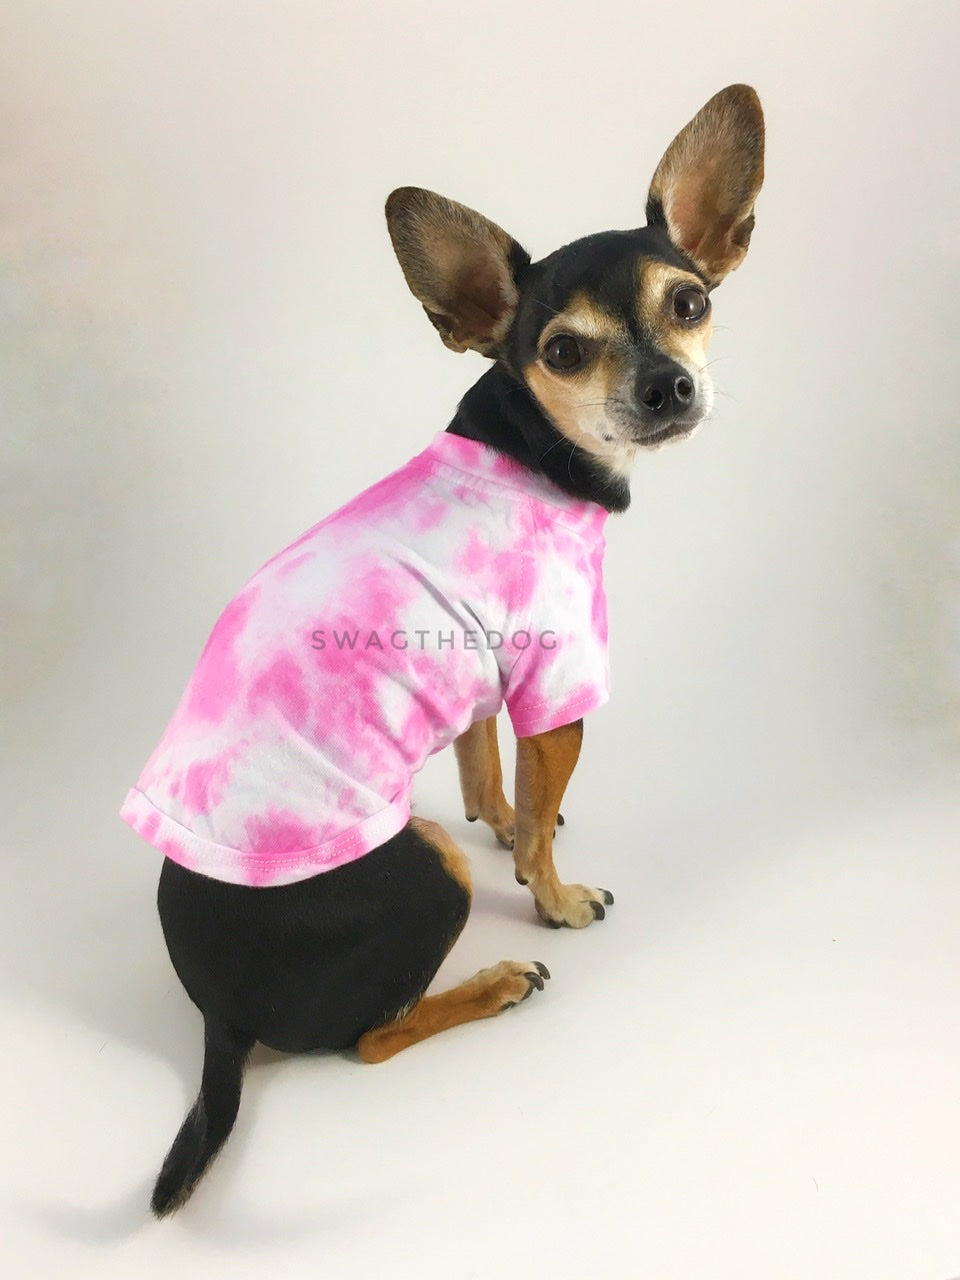 Swagadelic Pink Tie Dye Tee - Cute Chihuahua named Hugo in sitting position with his back towards the camera and looking back, wearing the hand tie-dyed tee with Pink